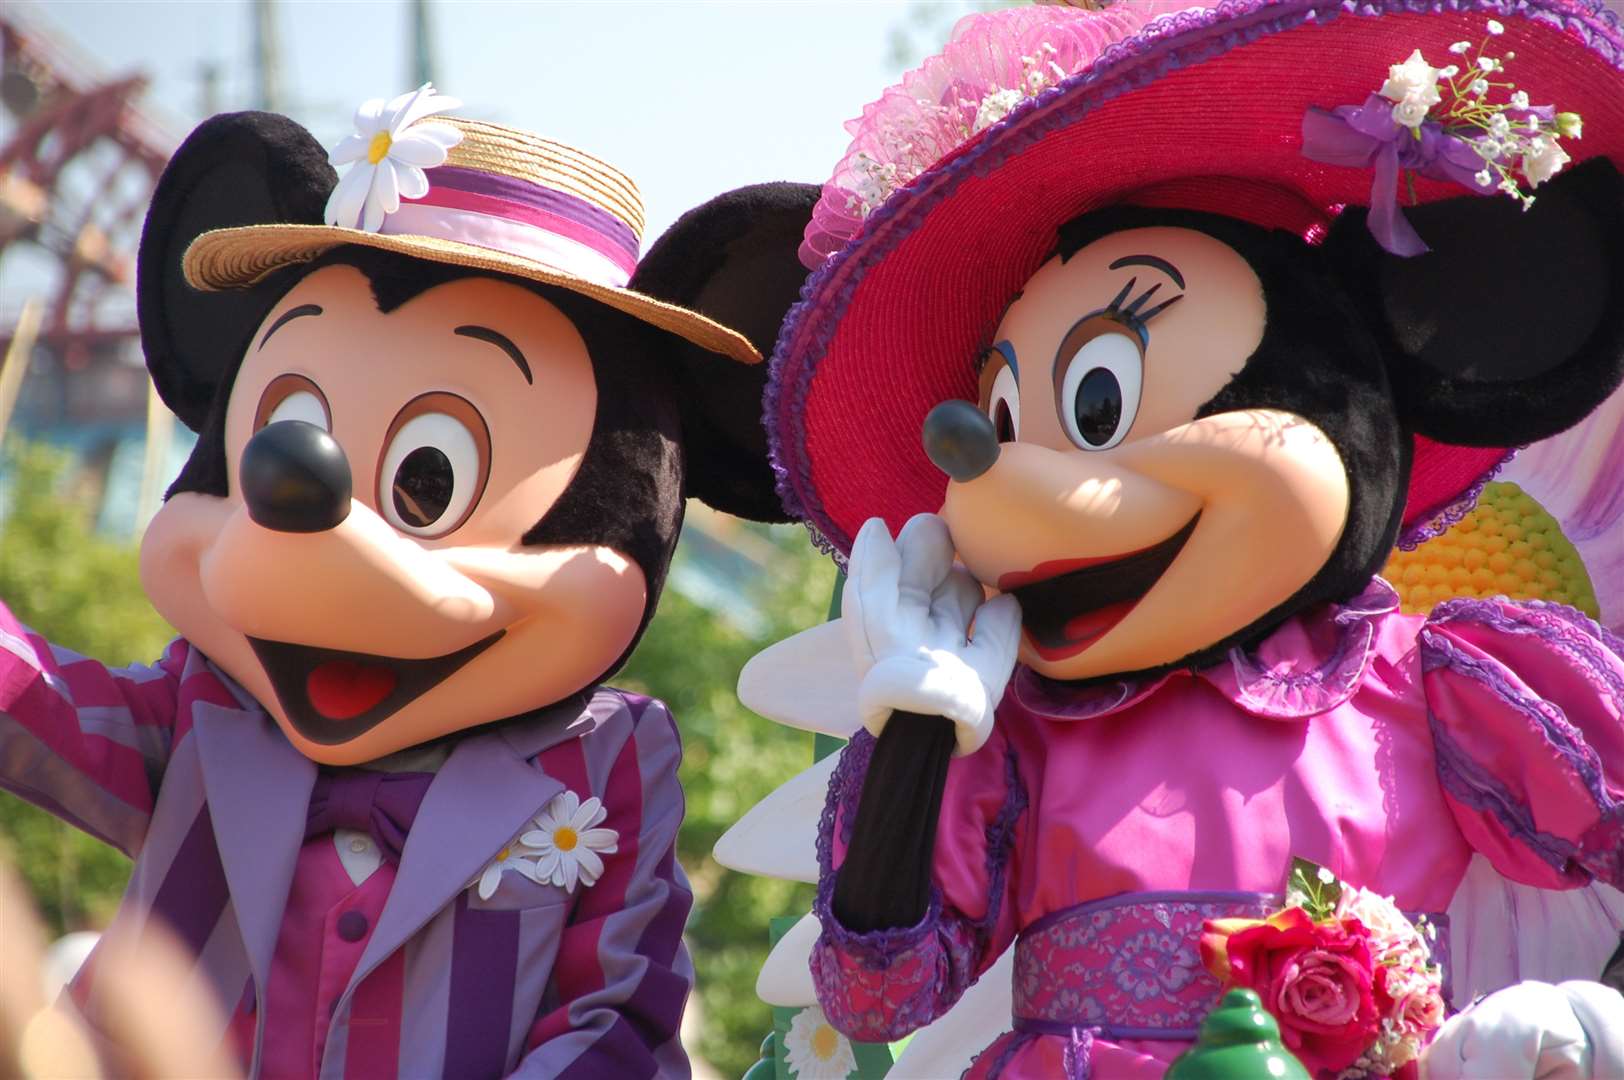 You could be in Disneyland Paris this summer with your family